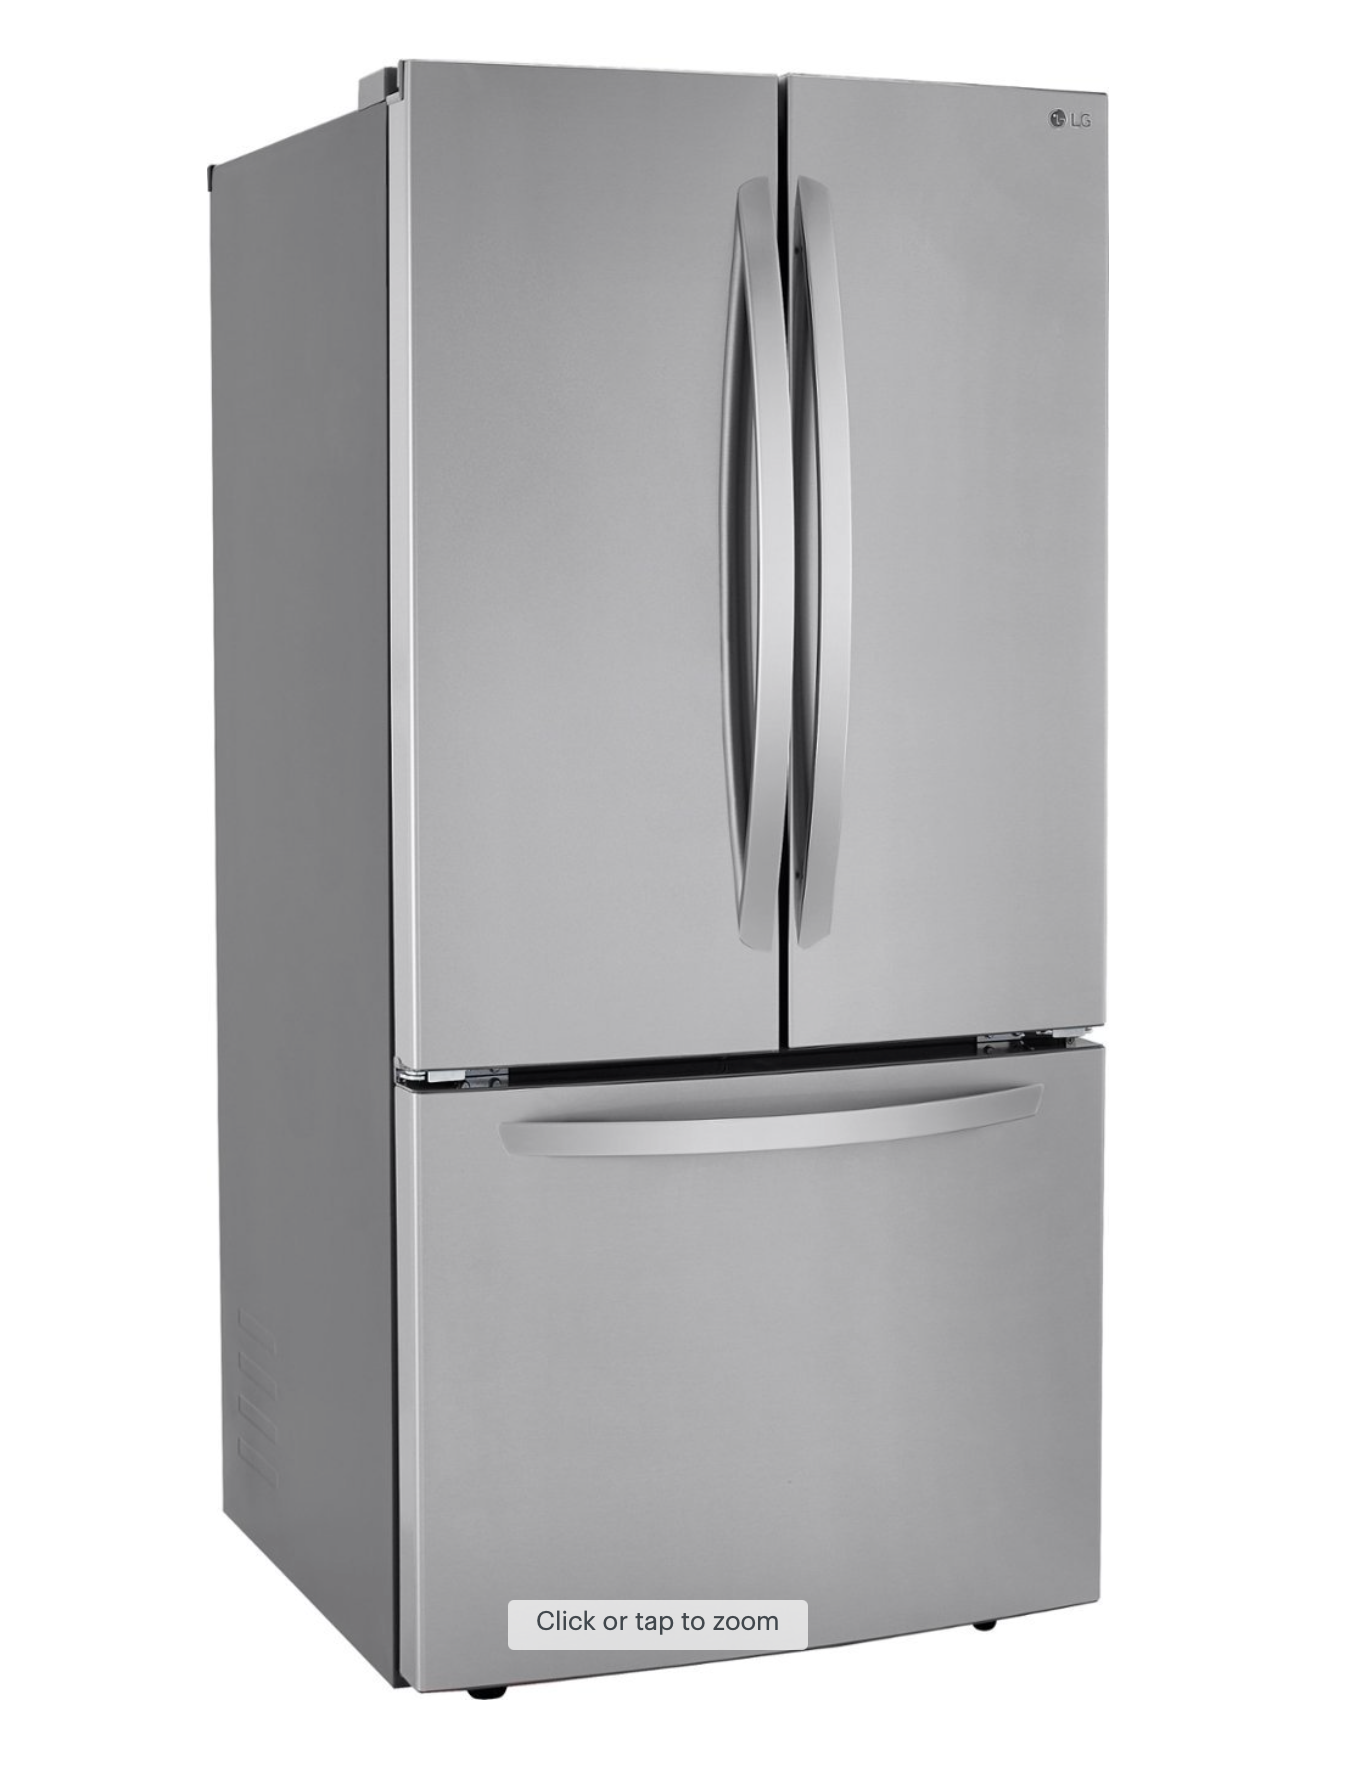 LG - 25.1 Cu. Ft. French Door Refrigerator with Ice Maker - Stainless Steel – (P)